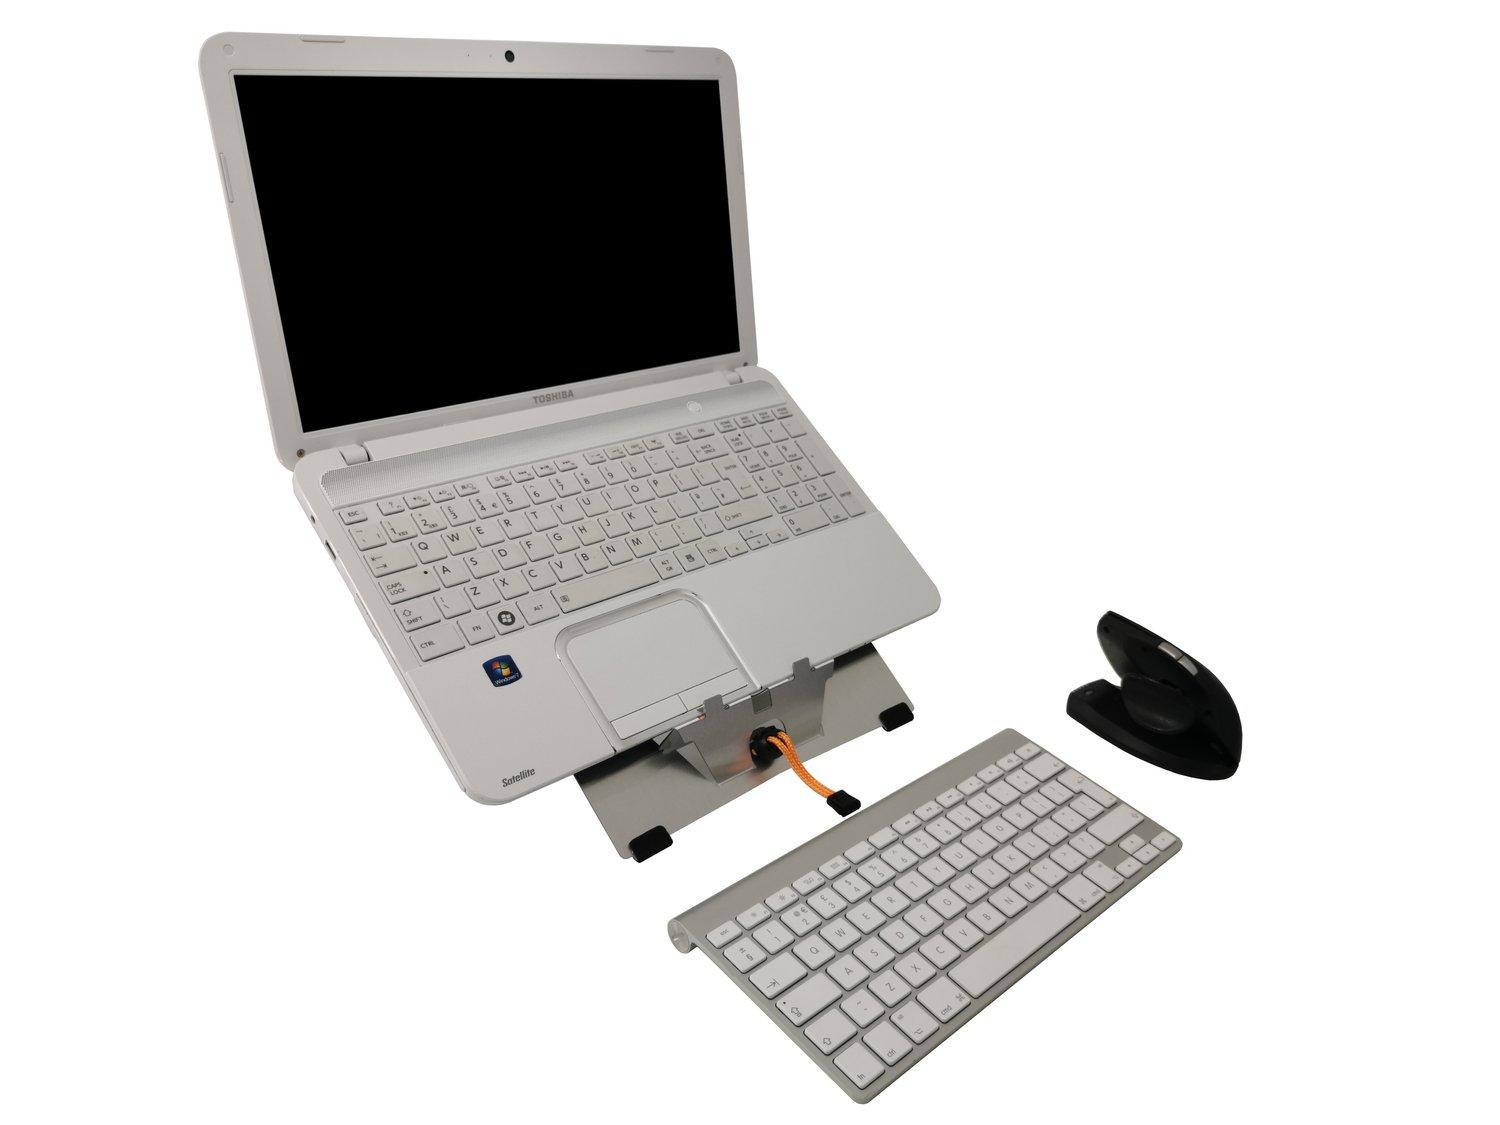 Go-2 Laptop & Tablet Stand set up with a laptop on it in front of the laptop there is a keyboard and to the right is a mouse